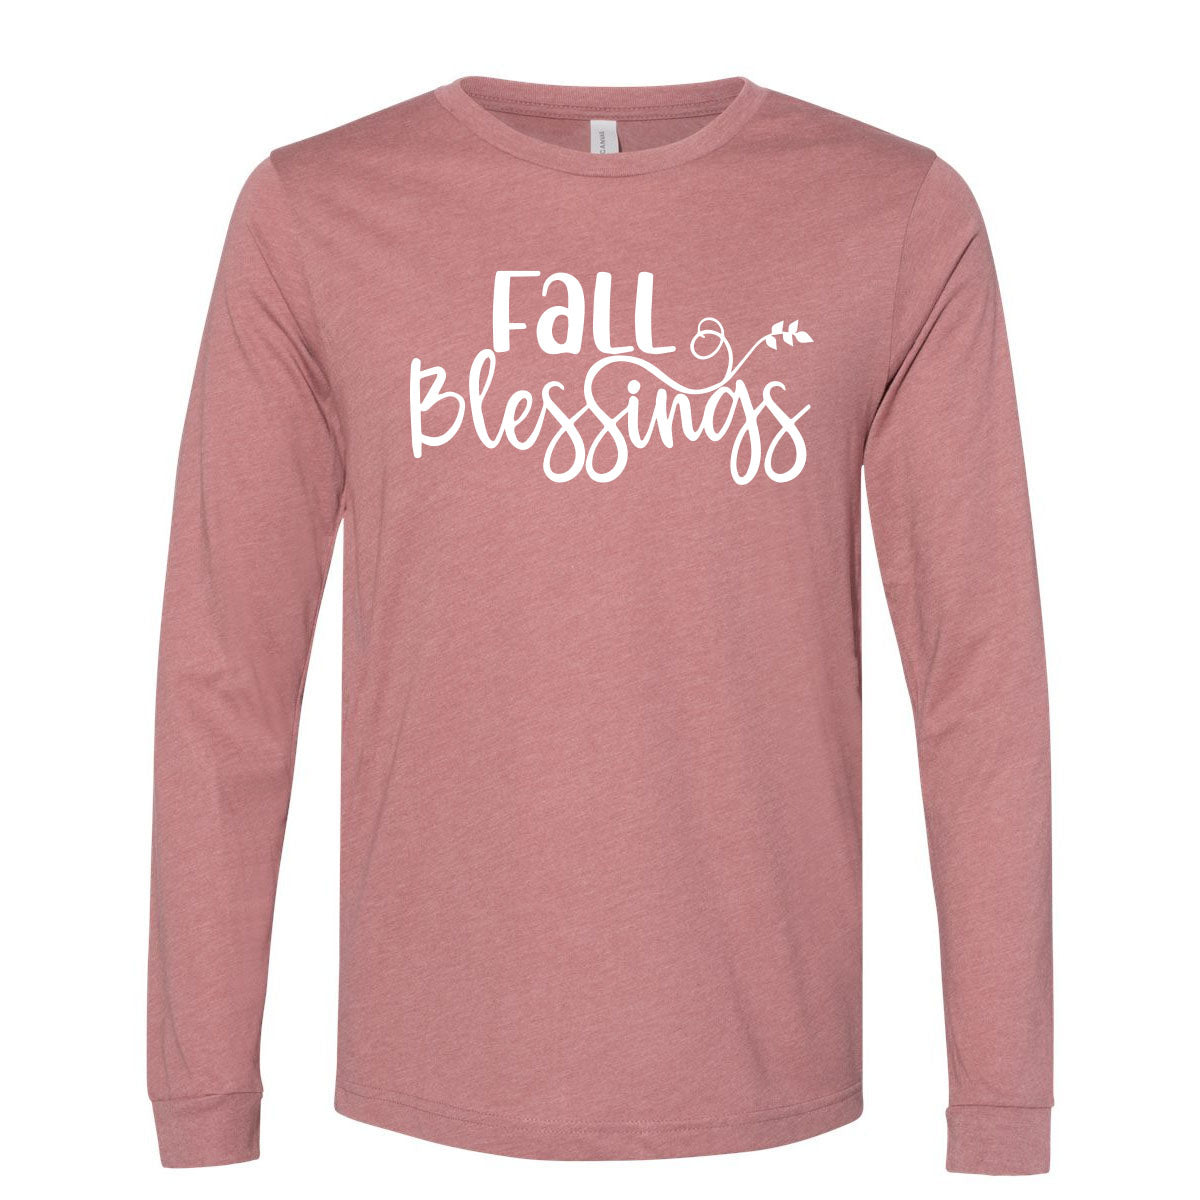 Fall Blessings - Mauve Long Sleeves Tee - Southern Grace Creations